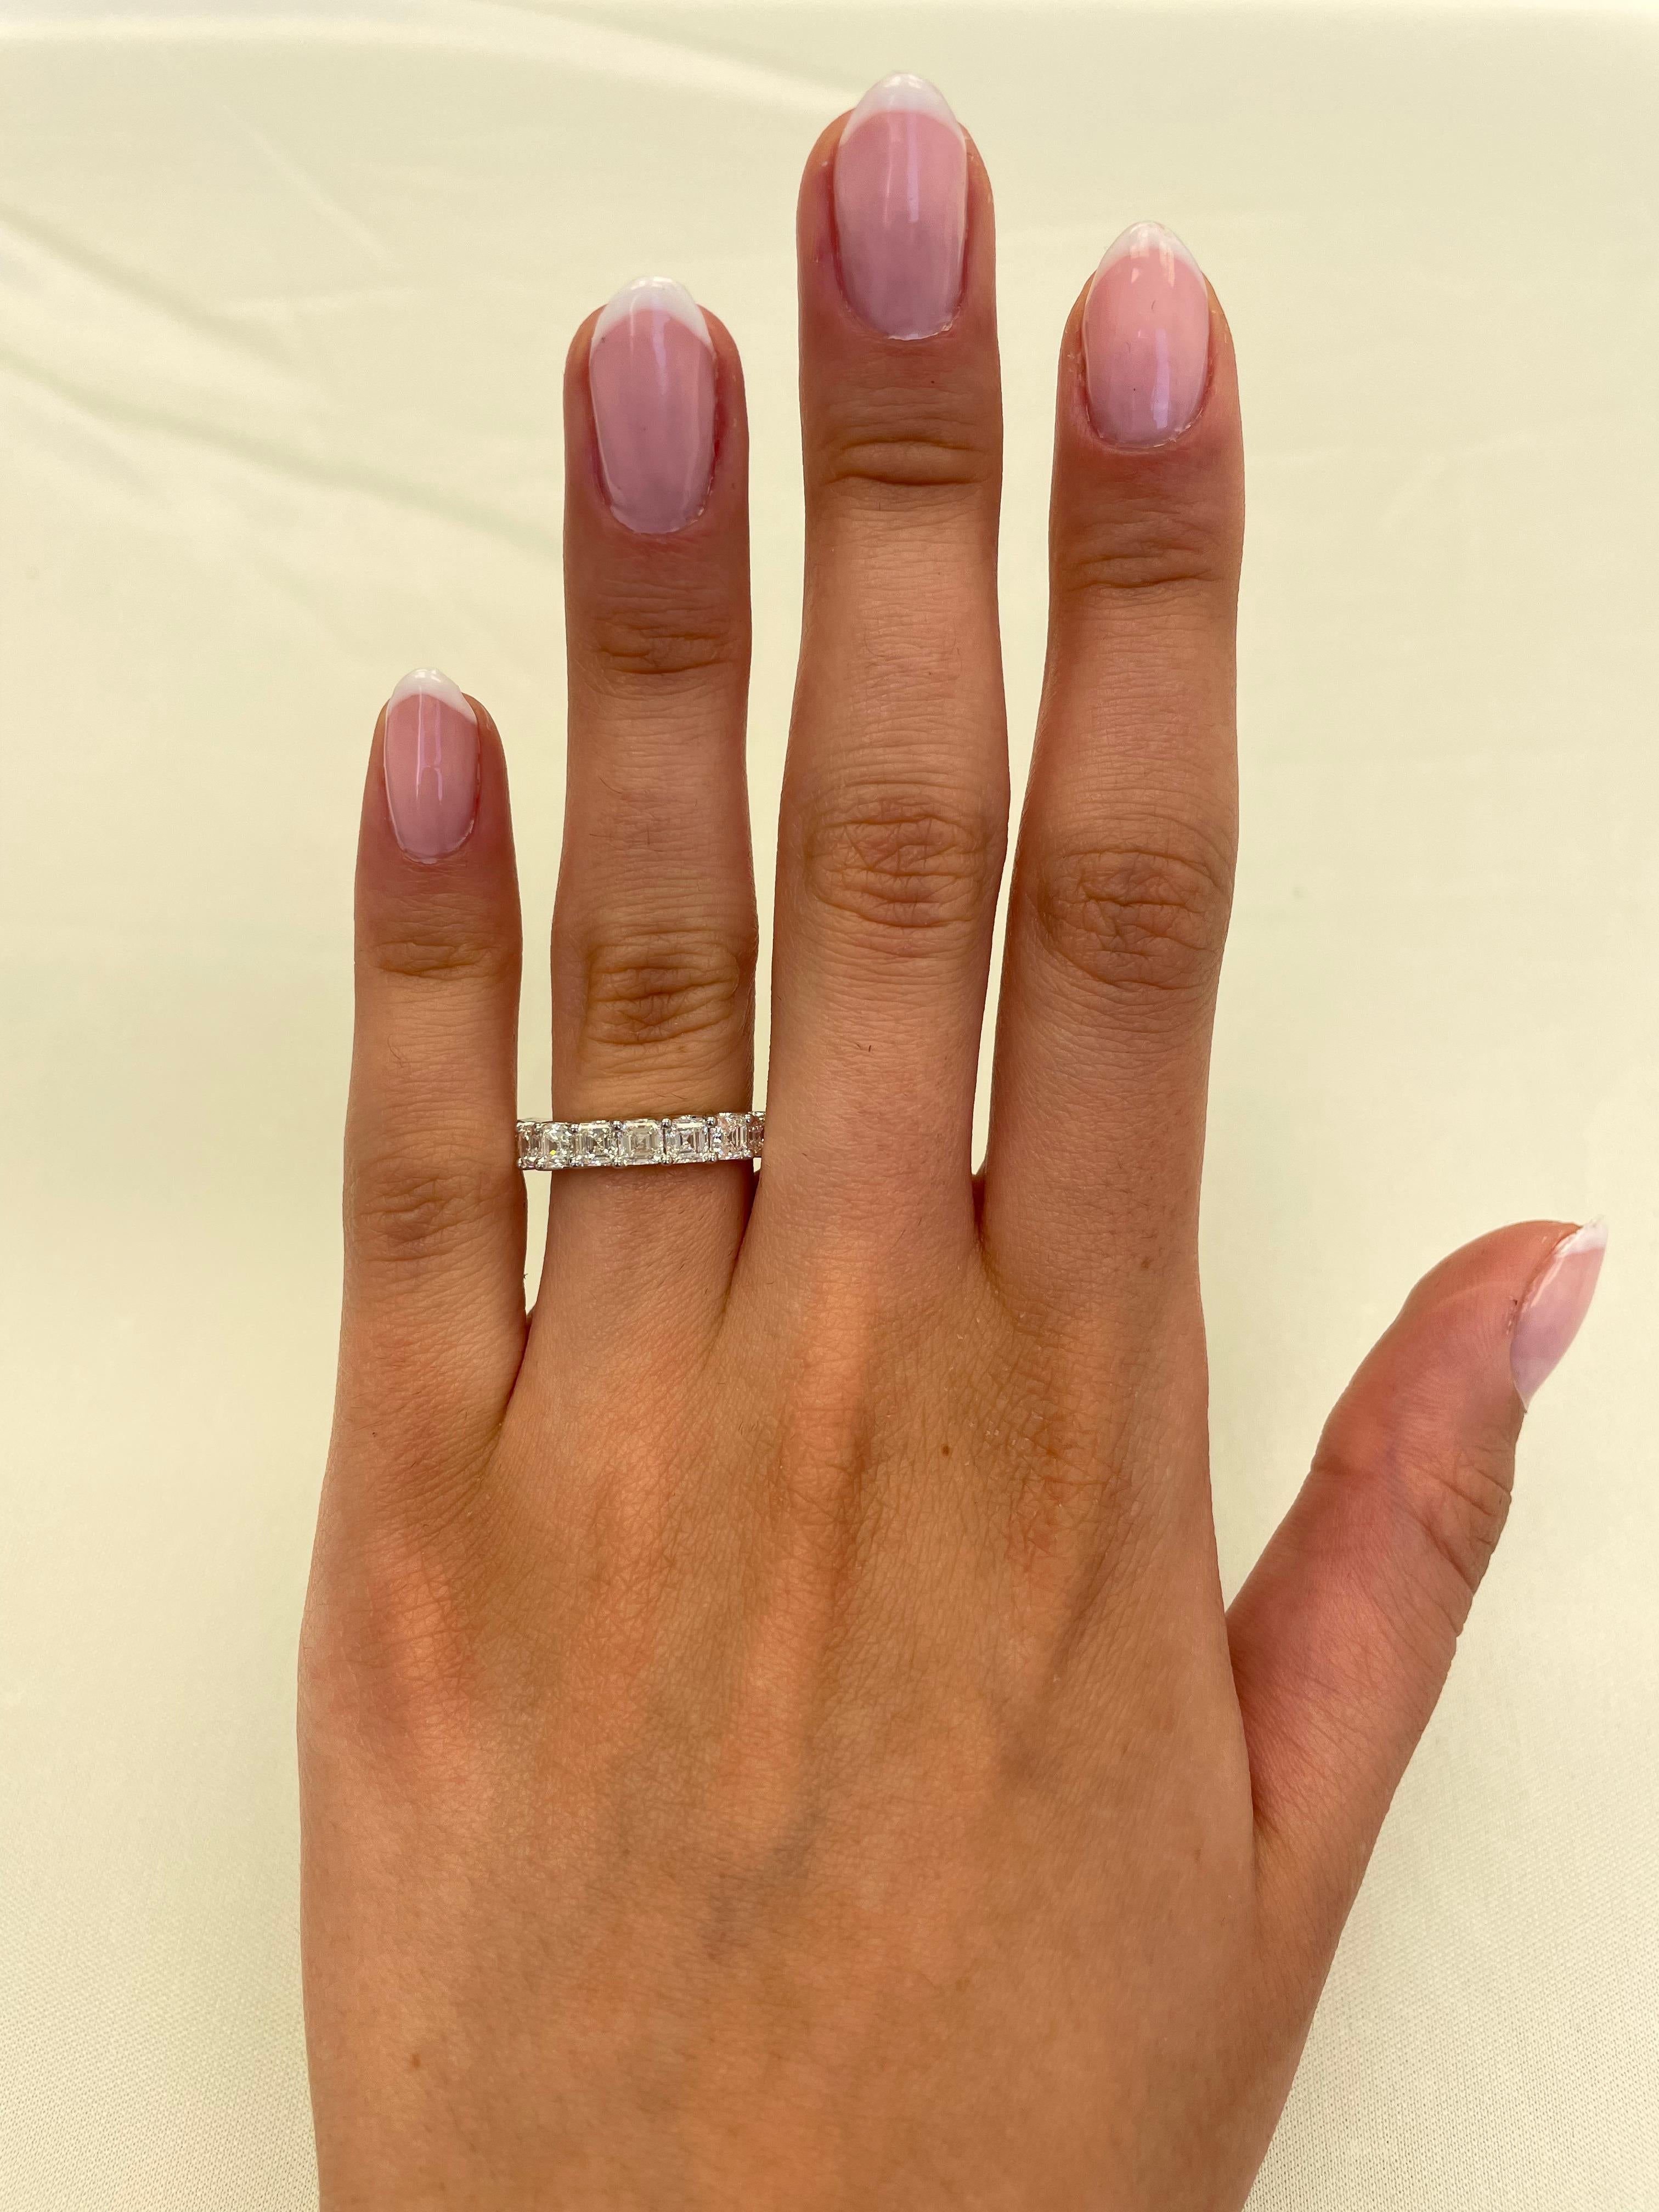 Stunning asscher cut diamond eternity band, By Alexander Beverly Hills.
19 asscher cut diamonds, 4.02 carats. D/E color and VVS clarity. 18-karat white gold, 3.57 grams, size 5.25. 
Accommodated with an up to date appraisal by a GIA G.G. upon